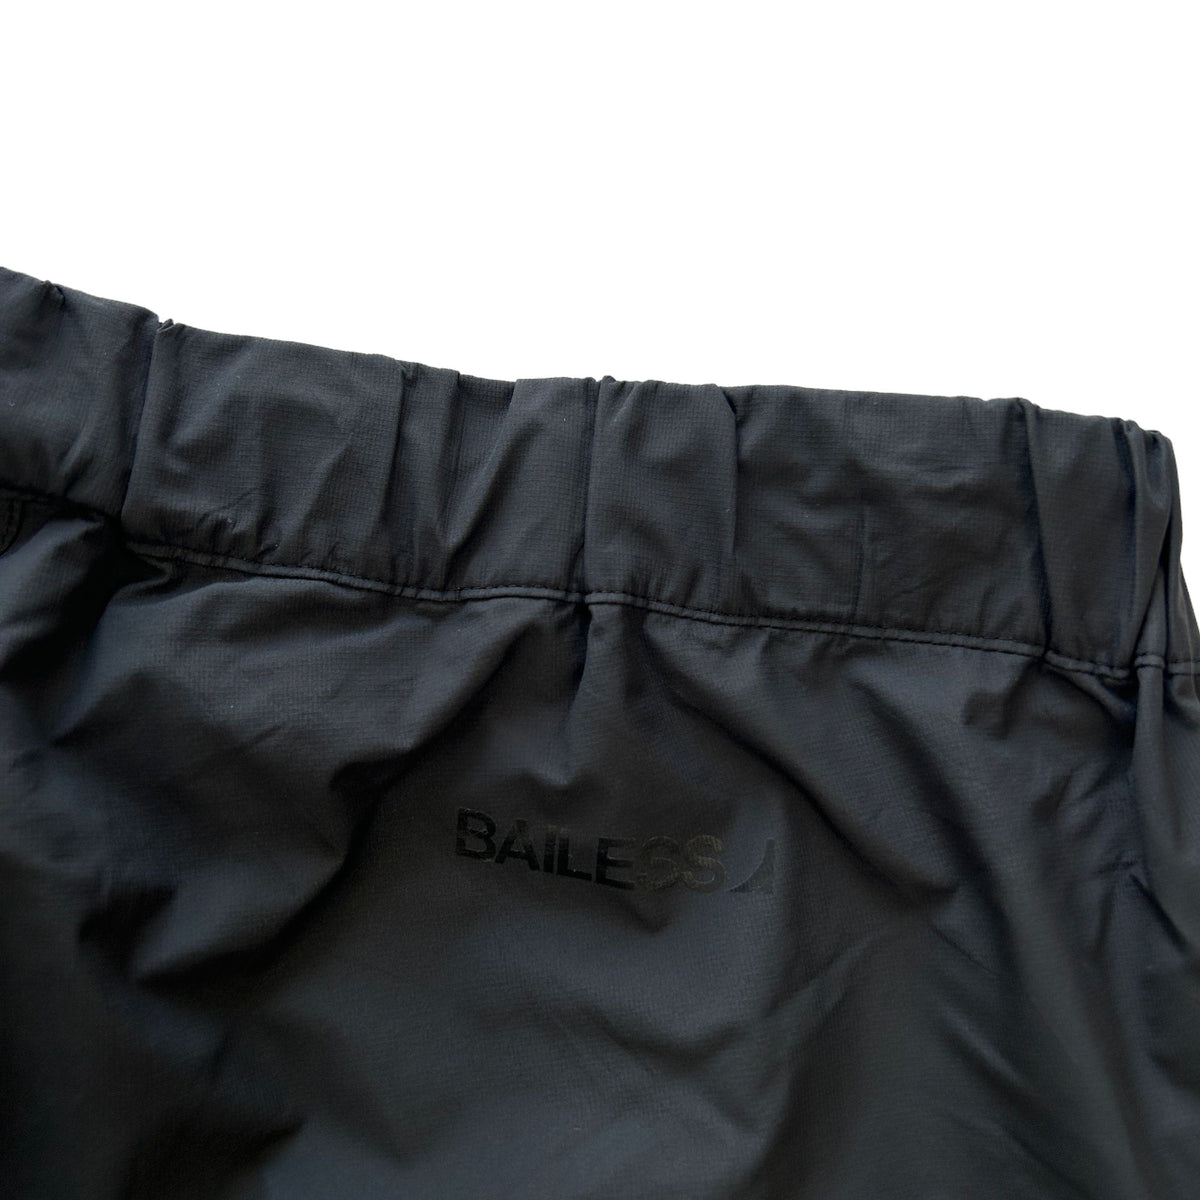 Vintage Bailess Waterproof GORE-TEX Trousers Size L